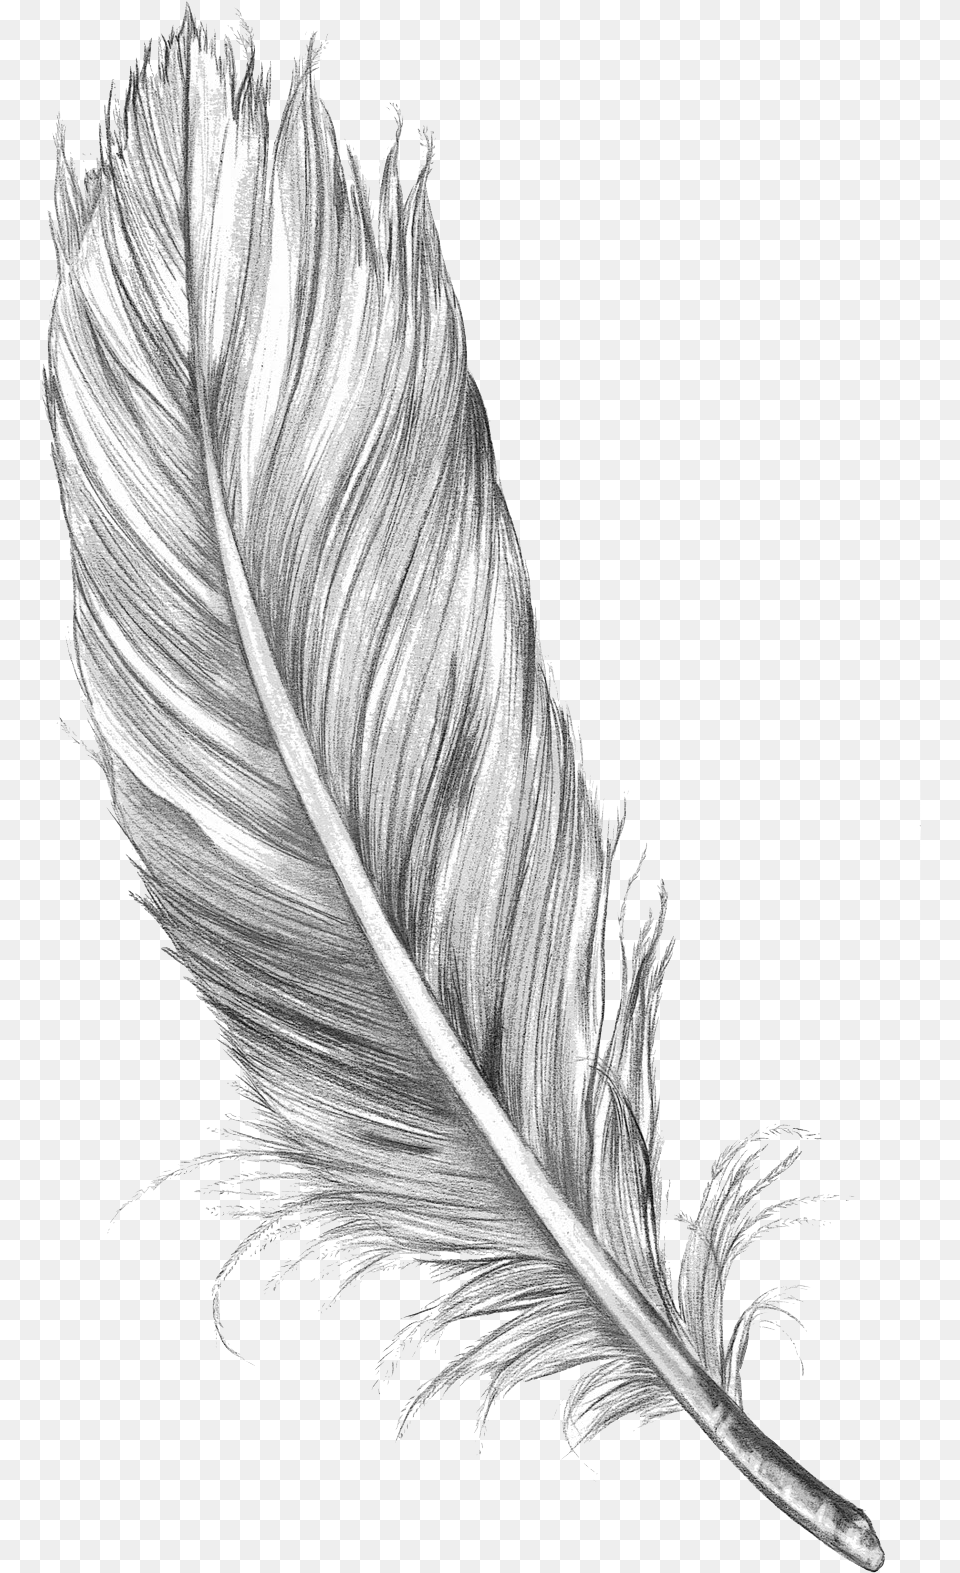 Feather Art Drawing Sketch Bird Hd Clipart Feather Sketch, Bottle, Person Png Image